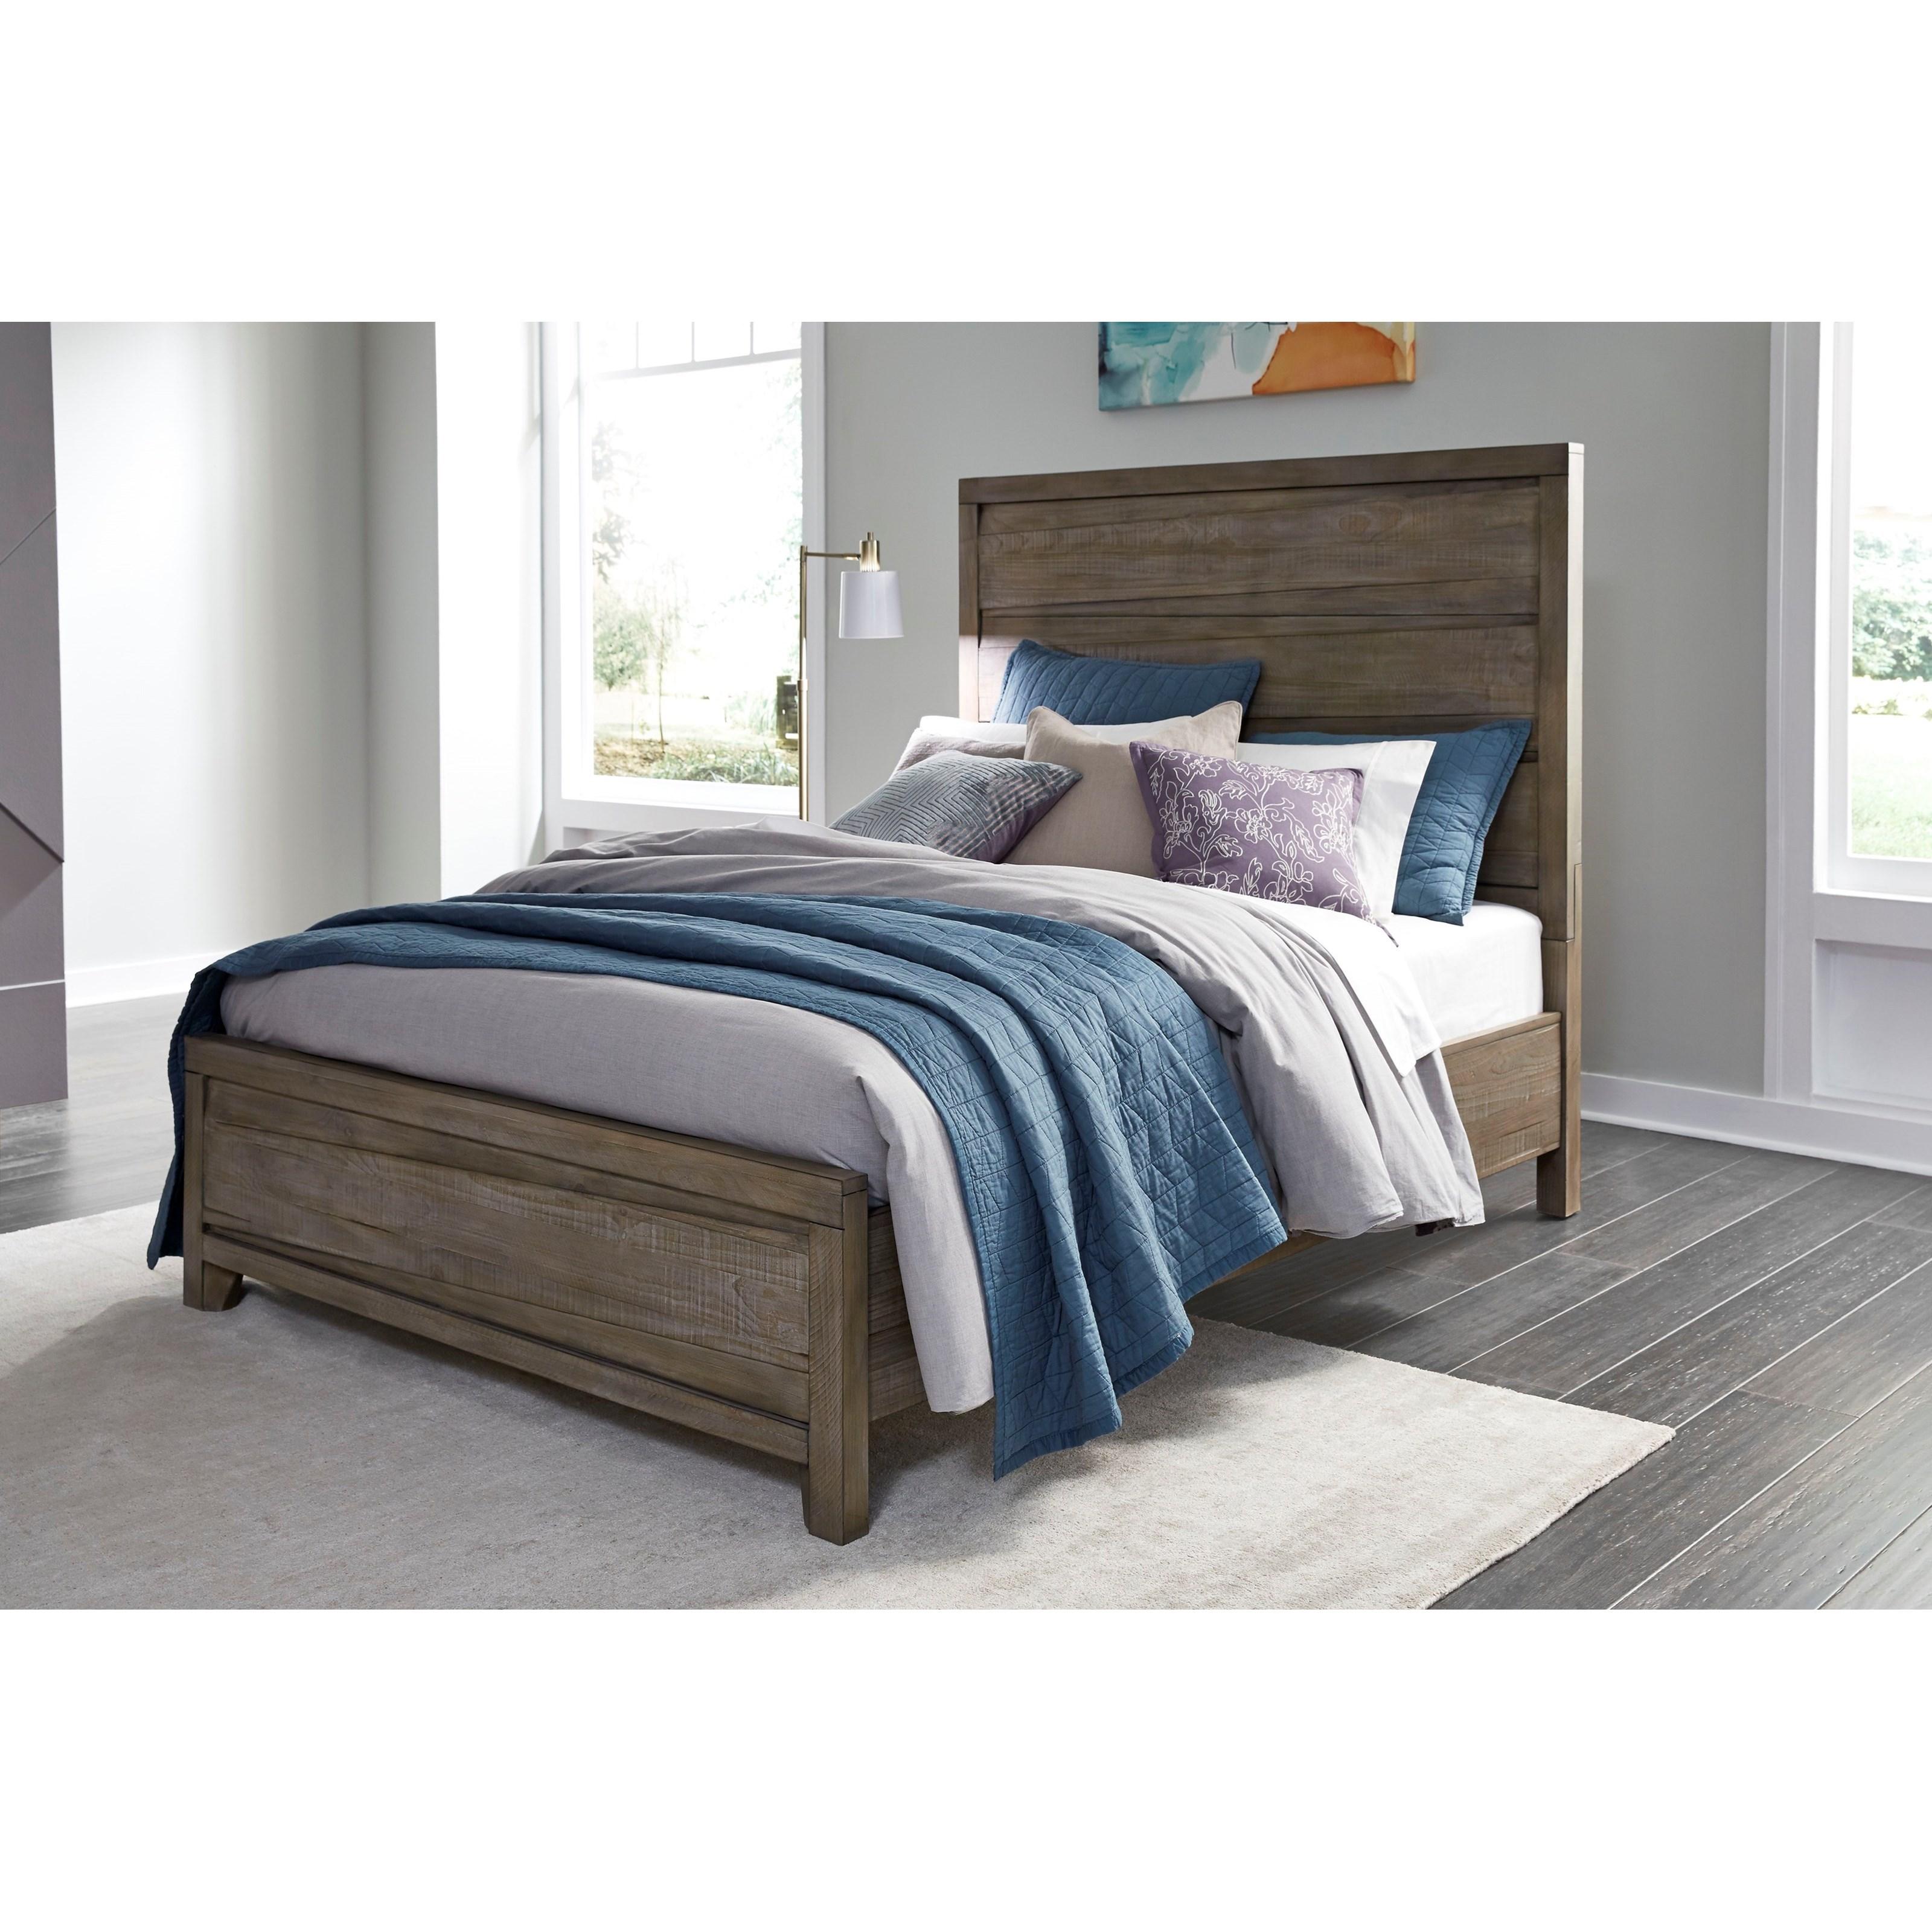 Casual, Rustic Panel Bed HEARST 6VF3A7 in Tan 